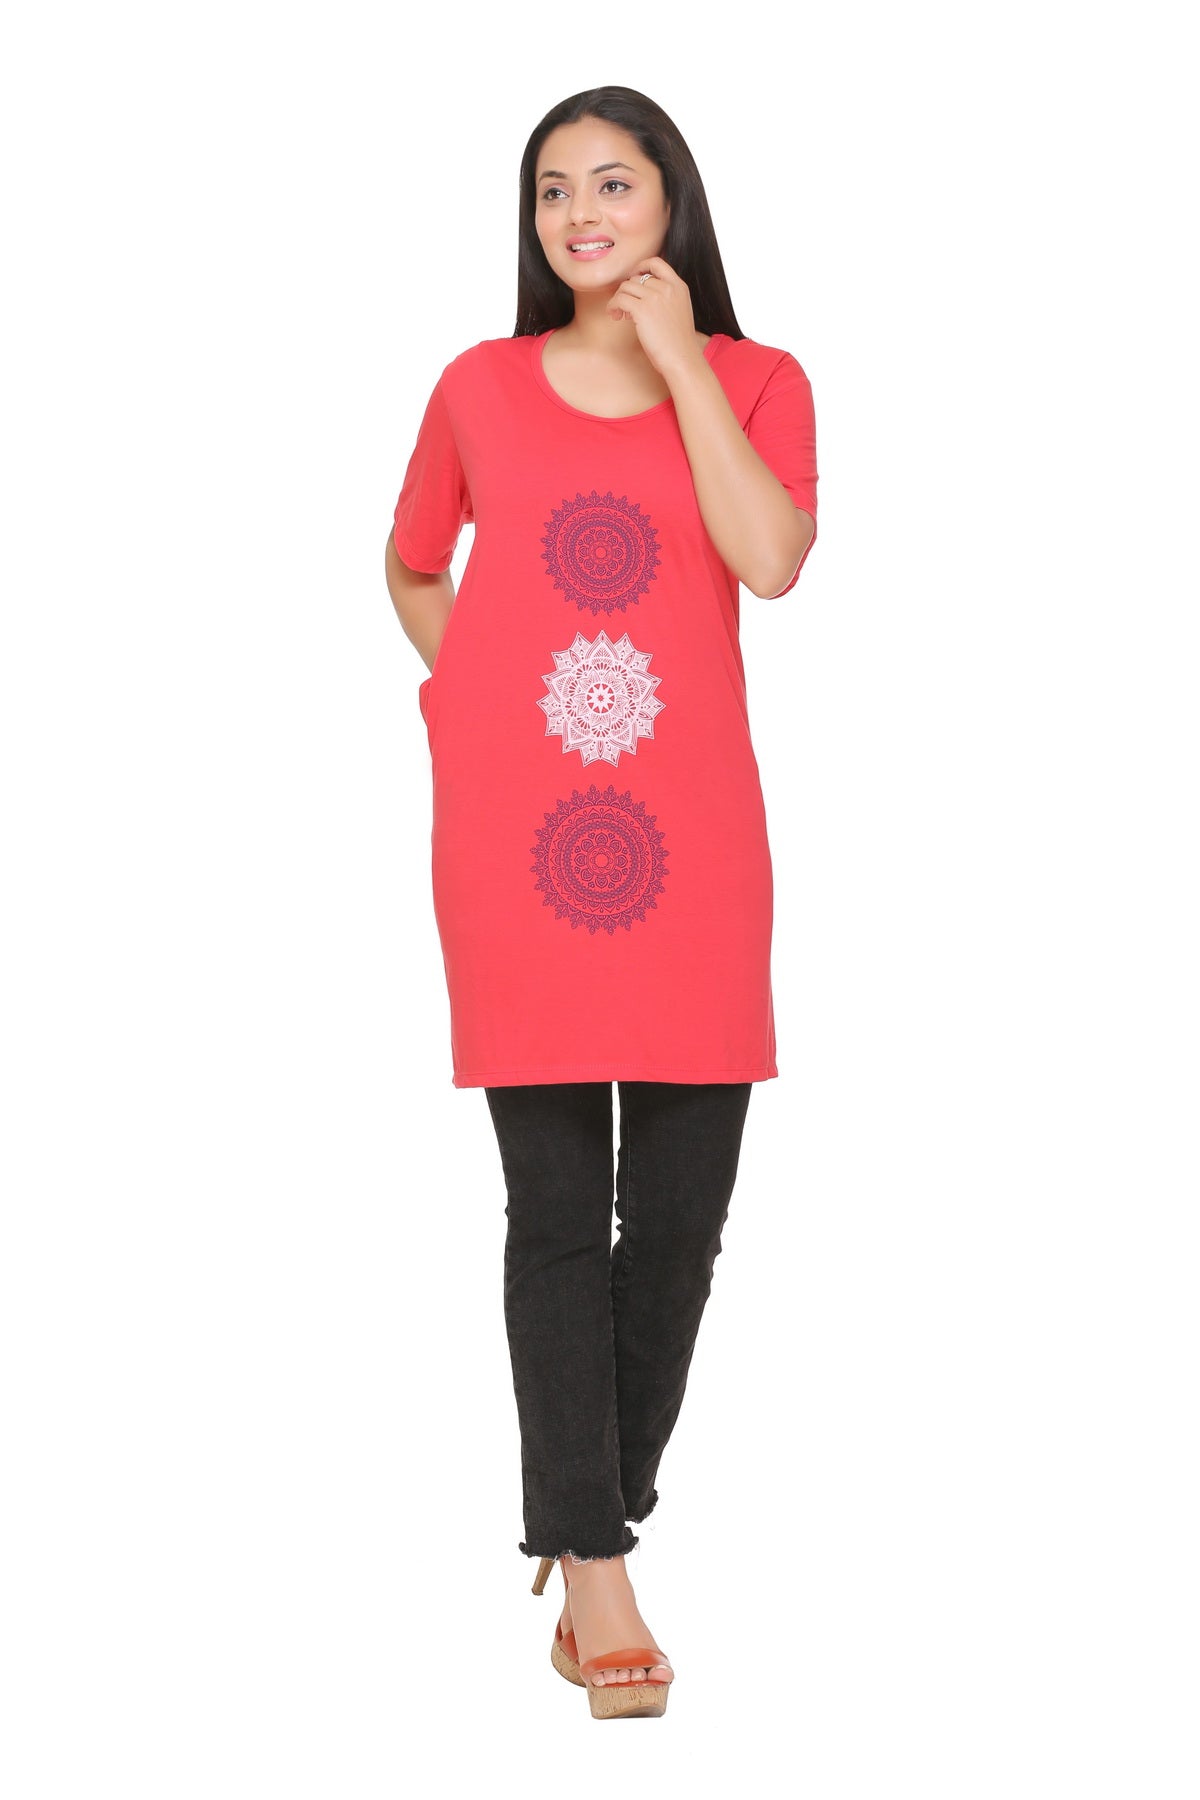 Plus Size Long T-shirts For Women - Half Sleeves